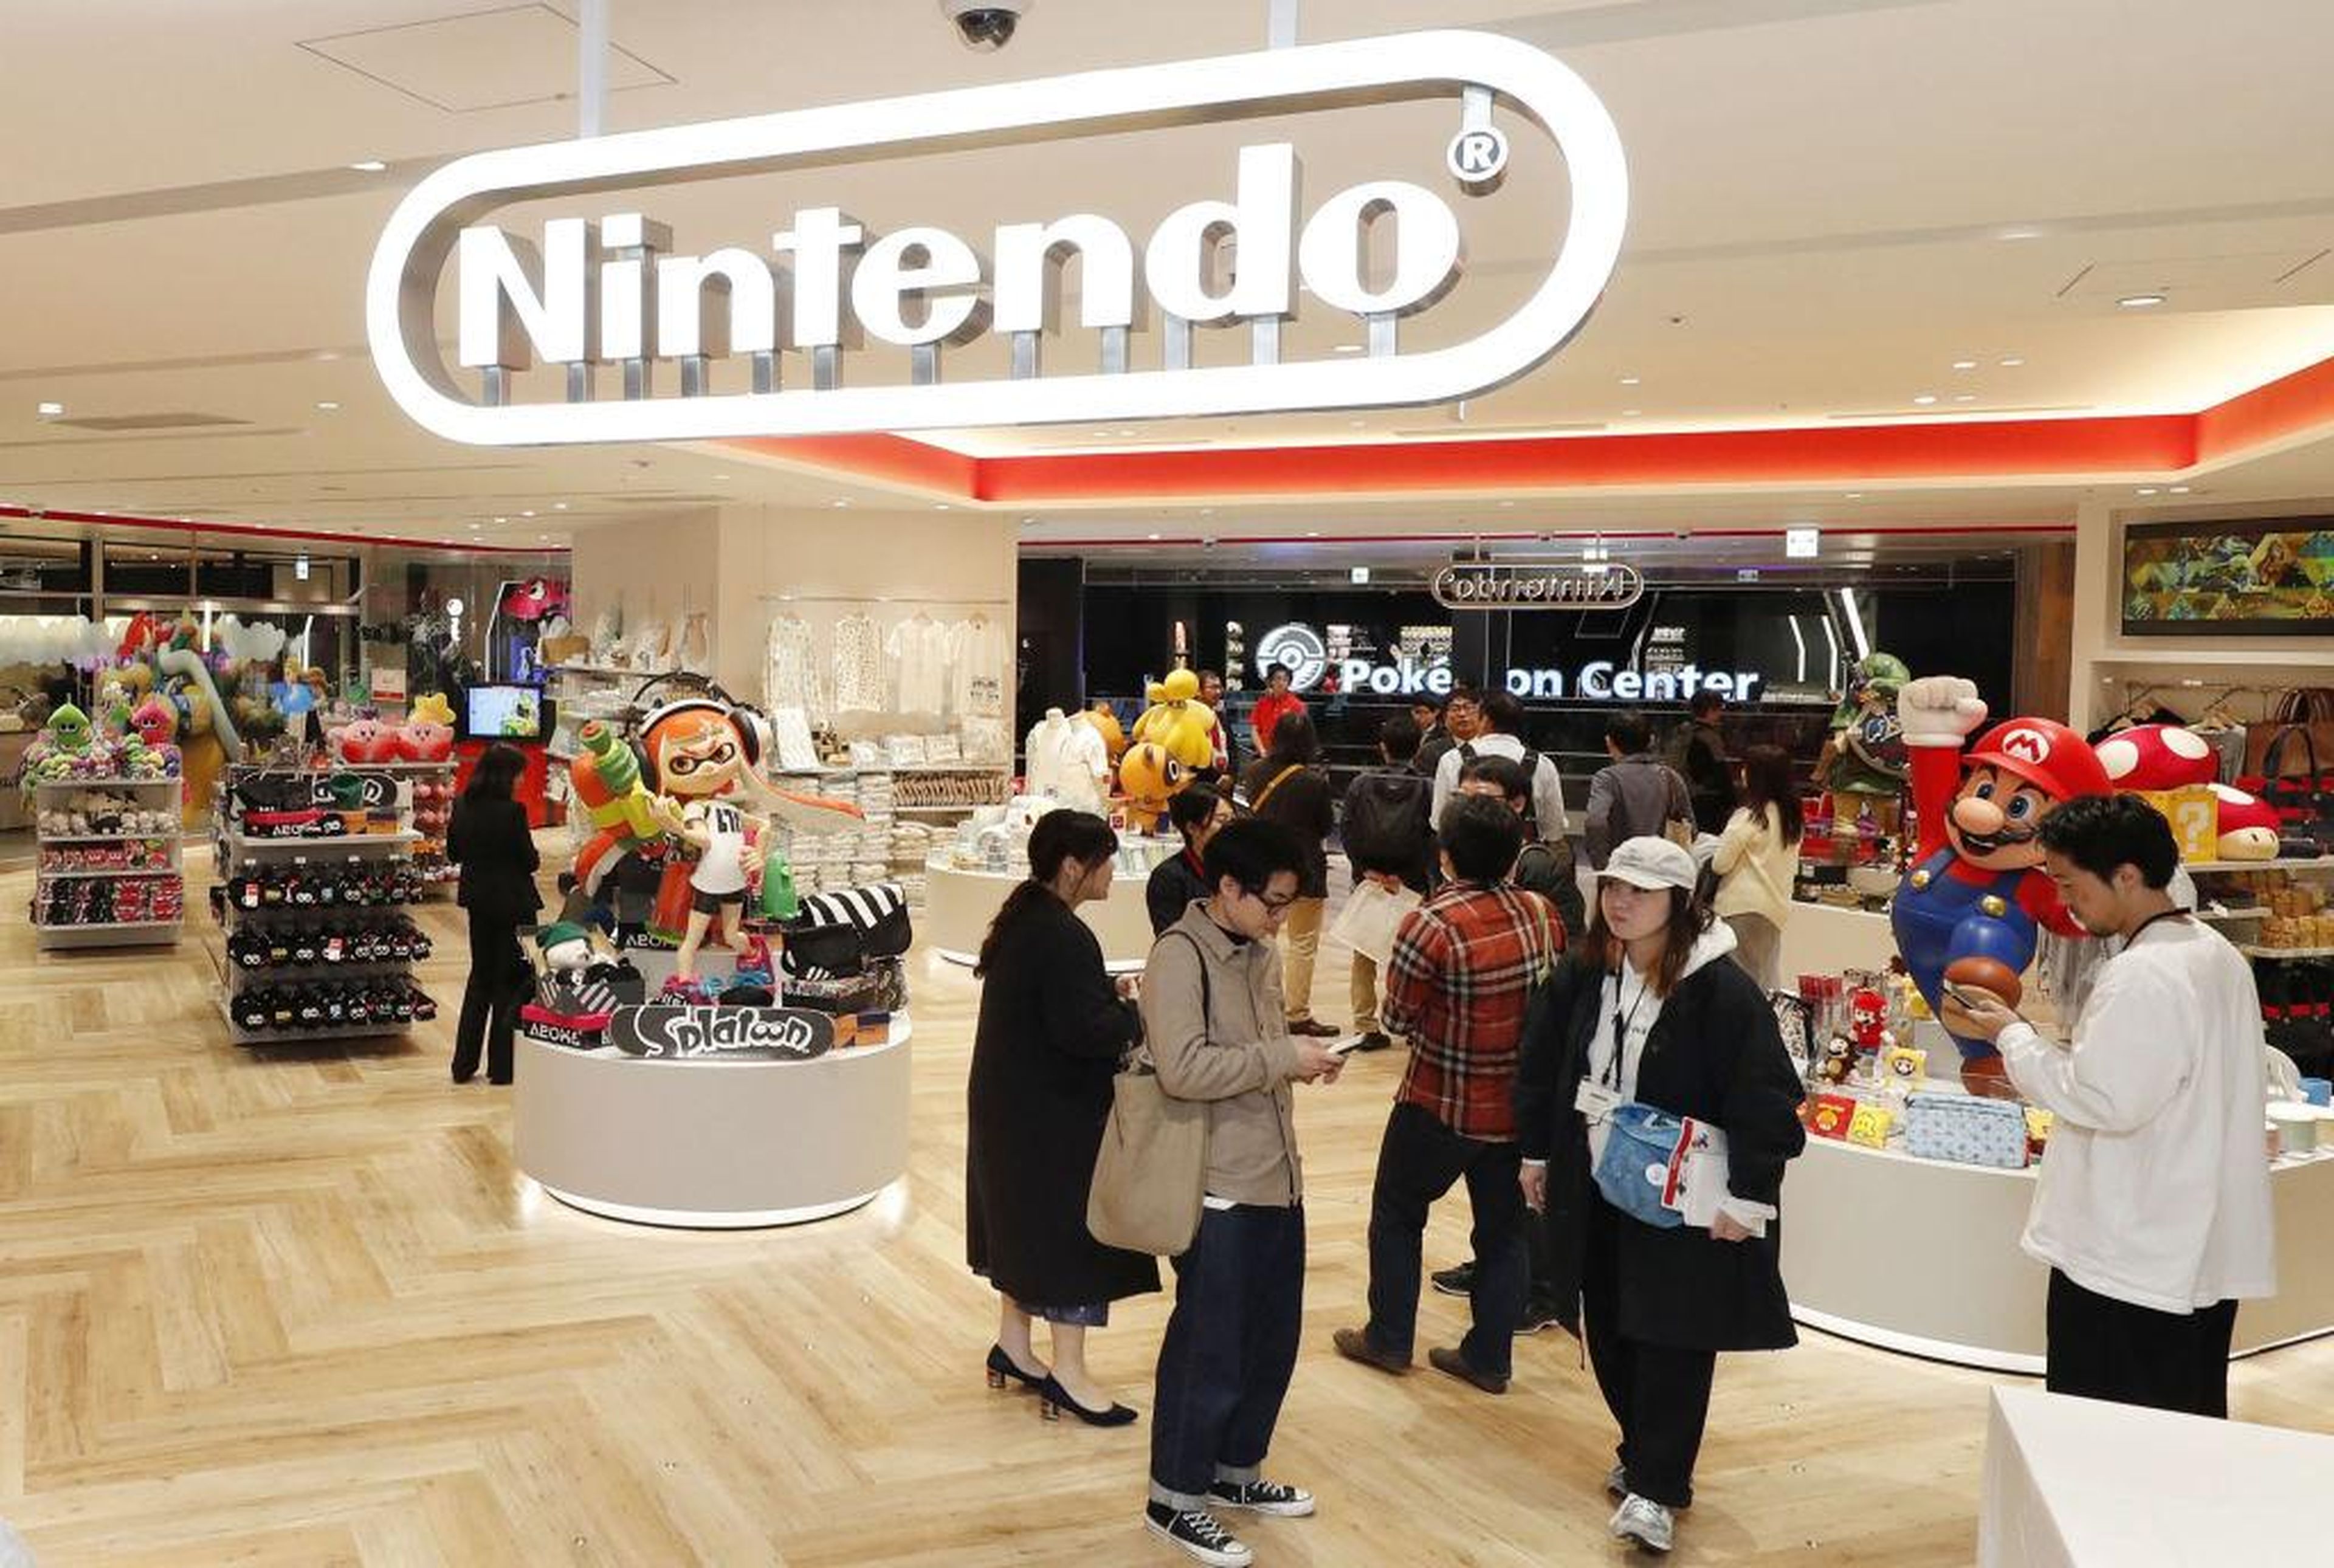 Nintendo Tokyo was opened for a press event on November 19 ahead of its grand opening on November 22.